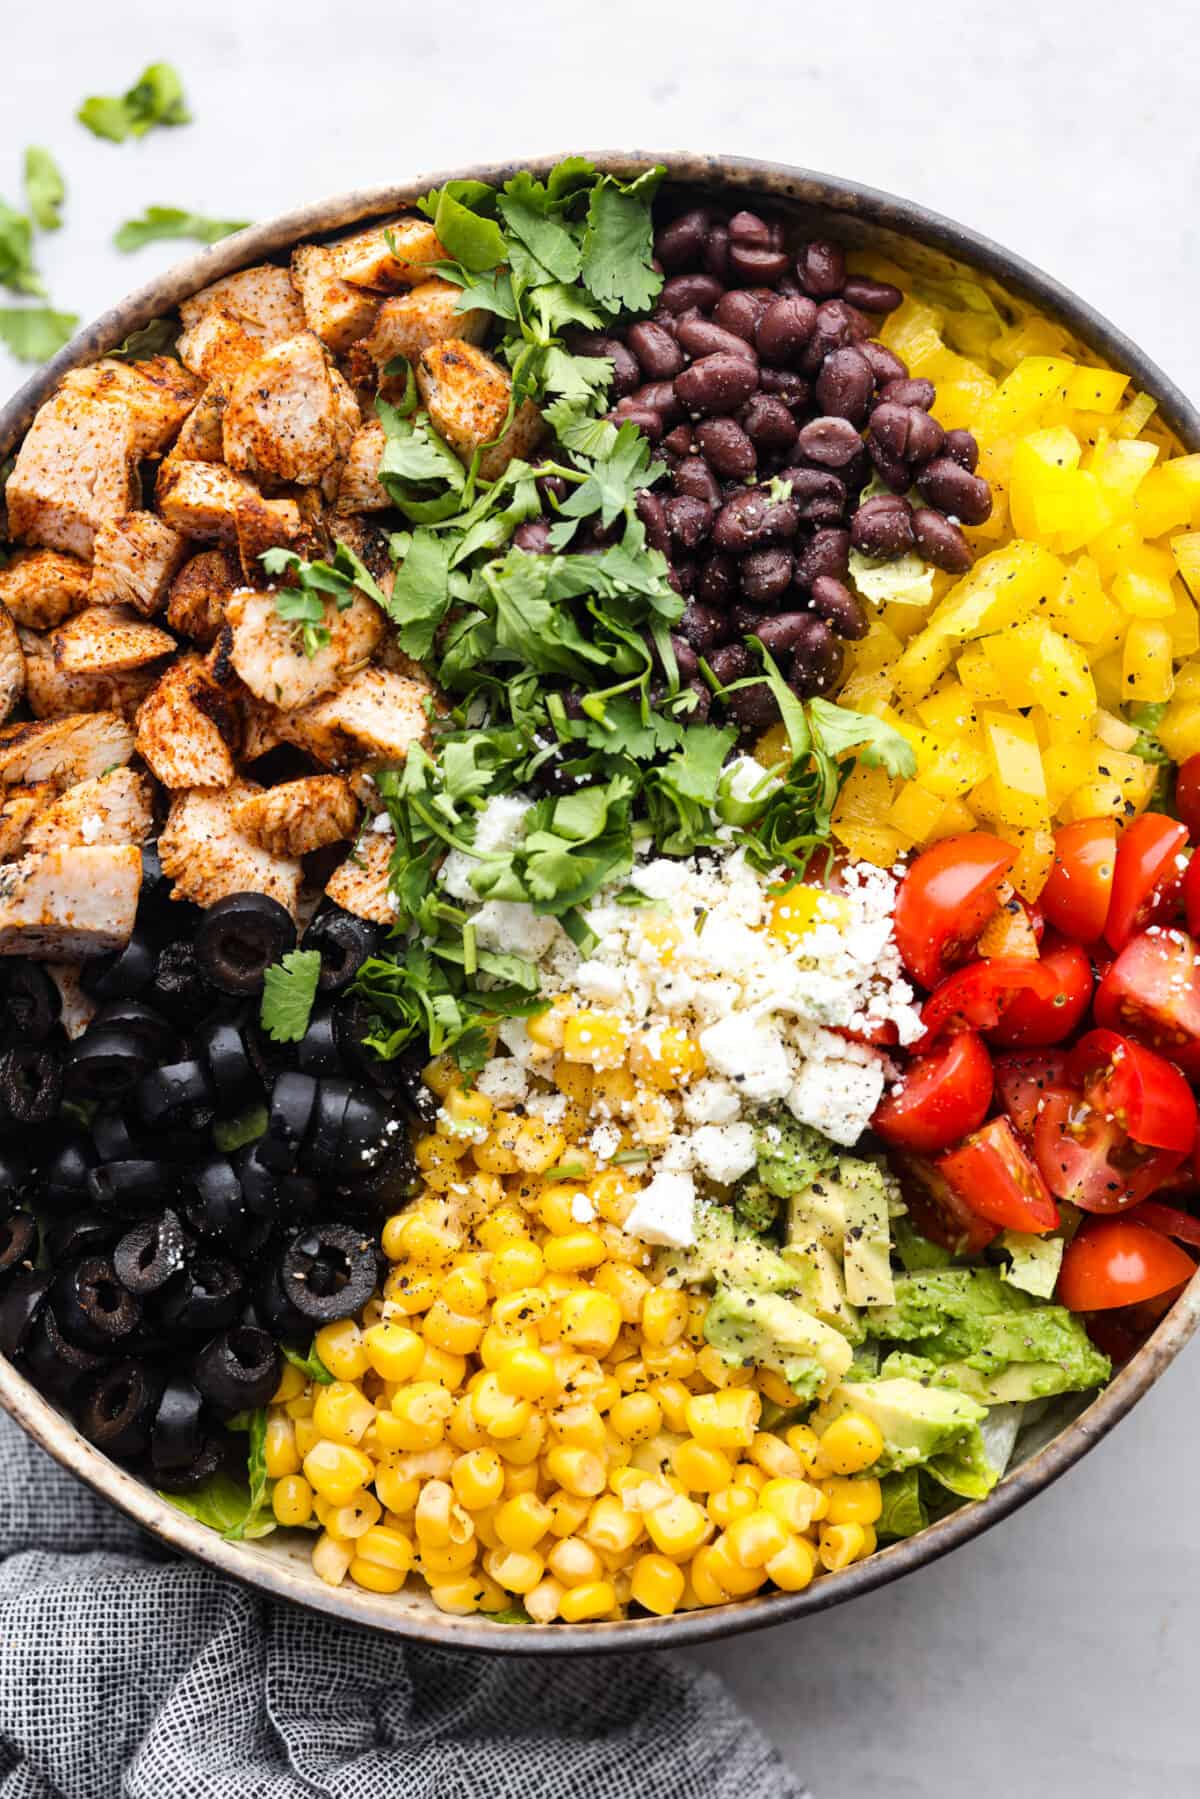 A santa fe salad made with vibrant veggies, chicken, and cheese